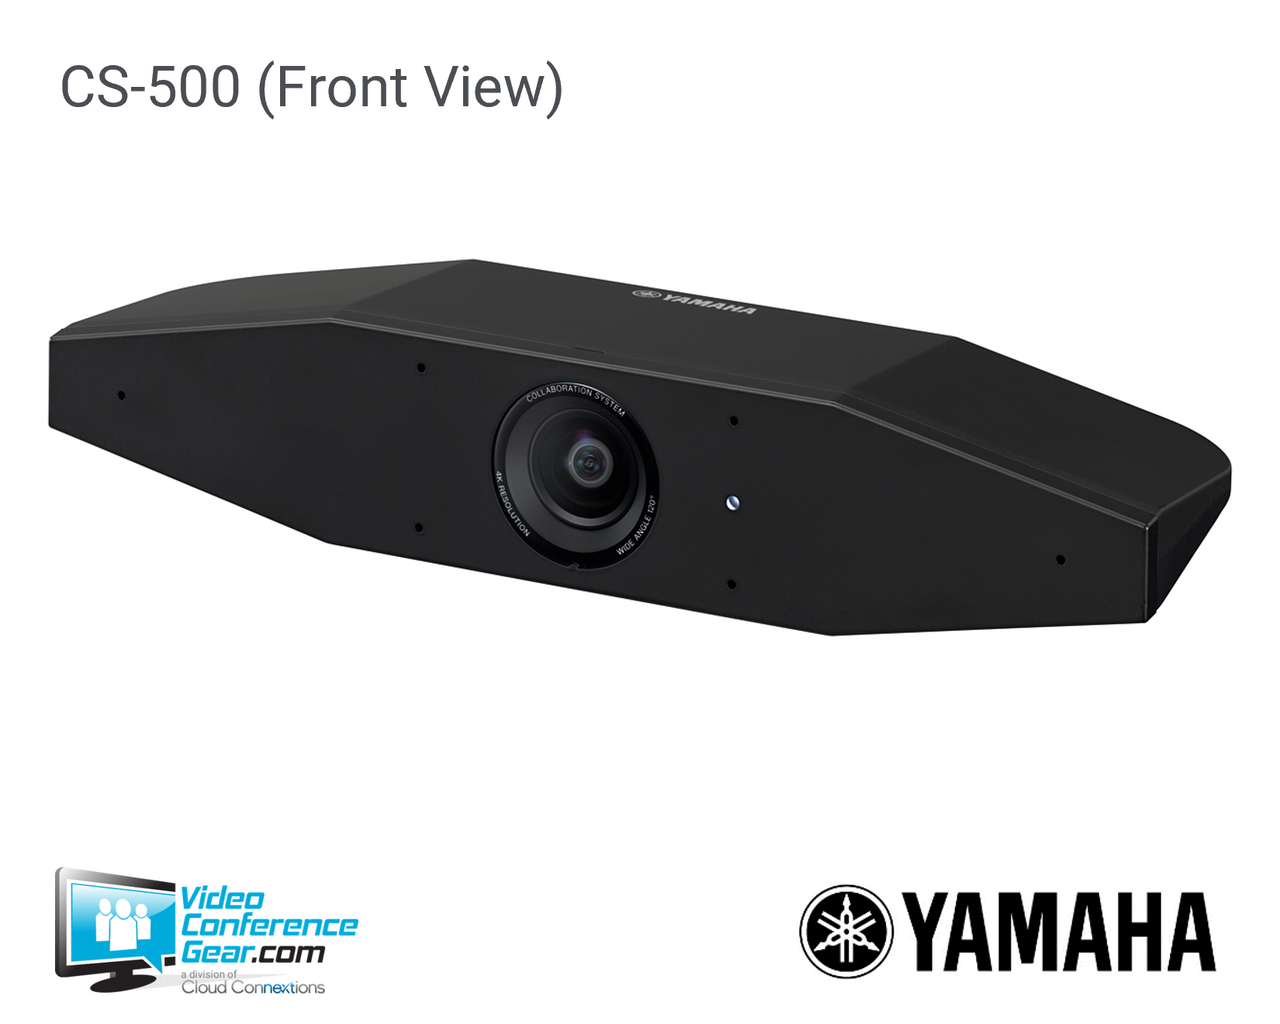 Yamaha CS500 Video Conference Video Soundbar for Your Small Meeting Spaces and Huddle Rooms